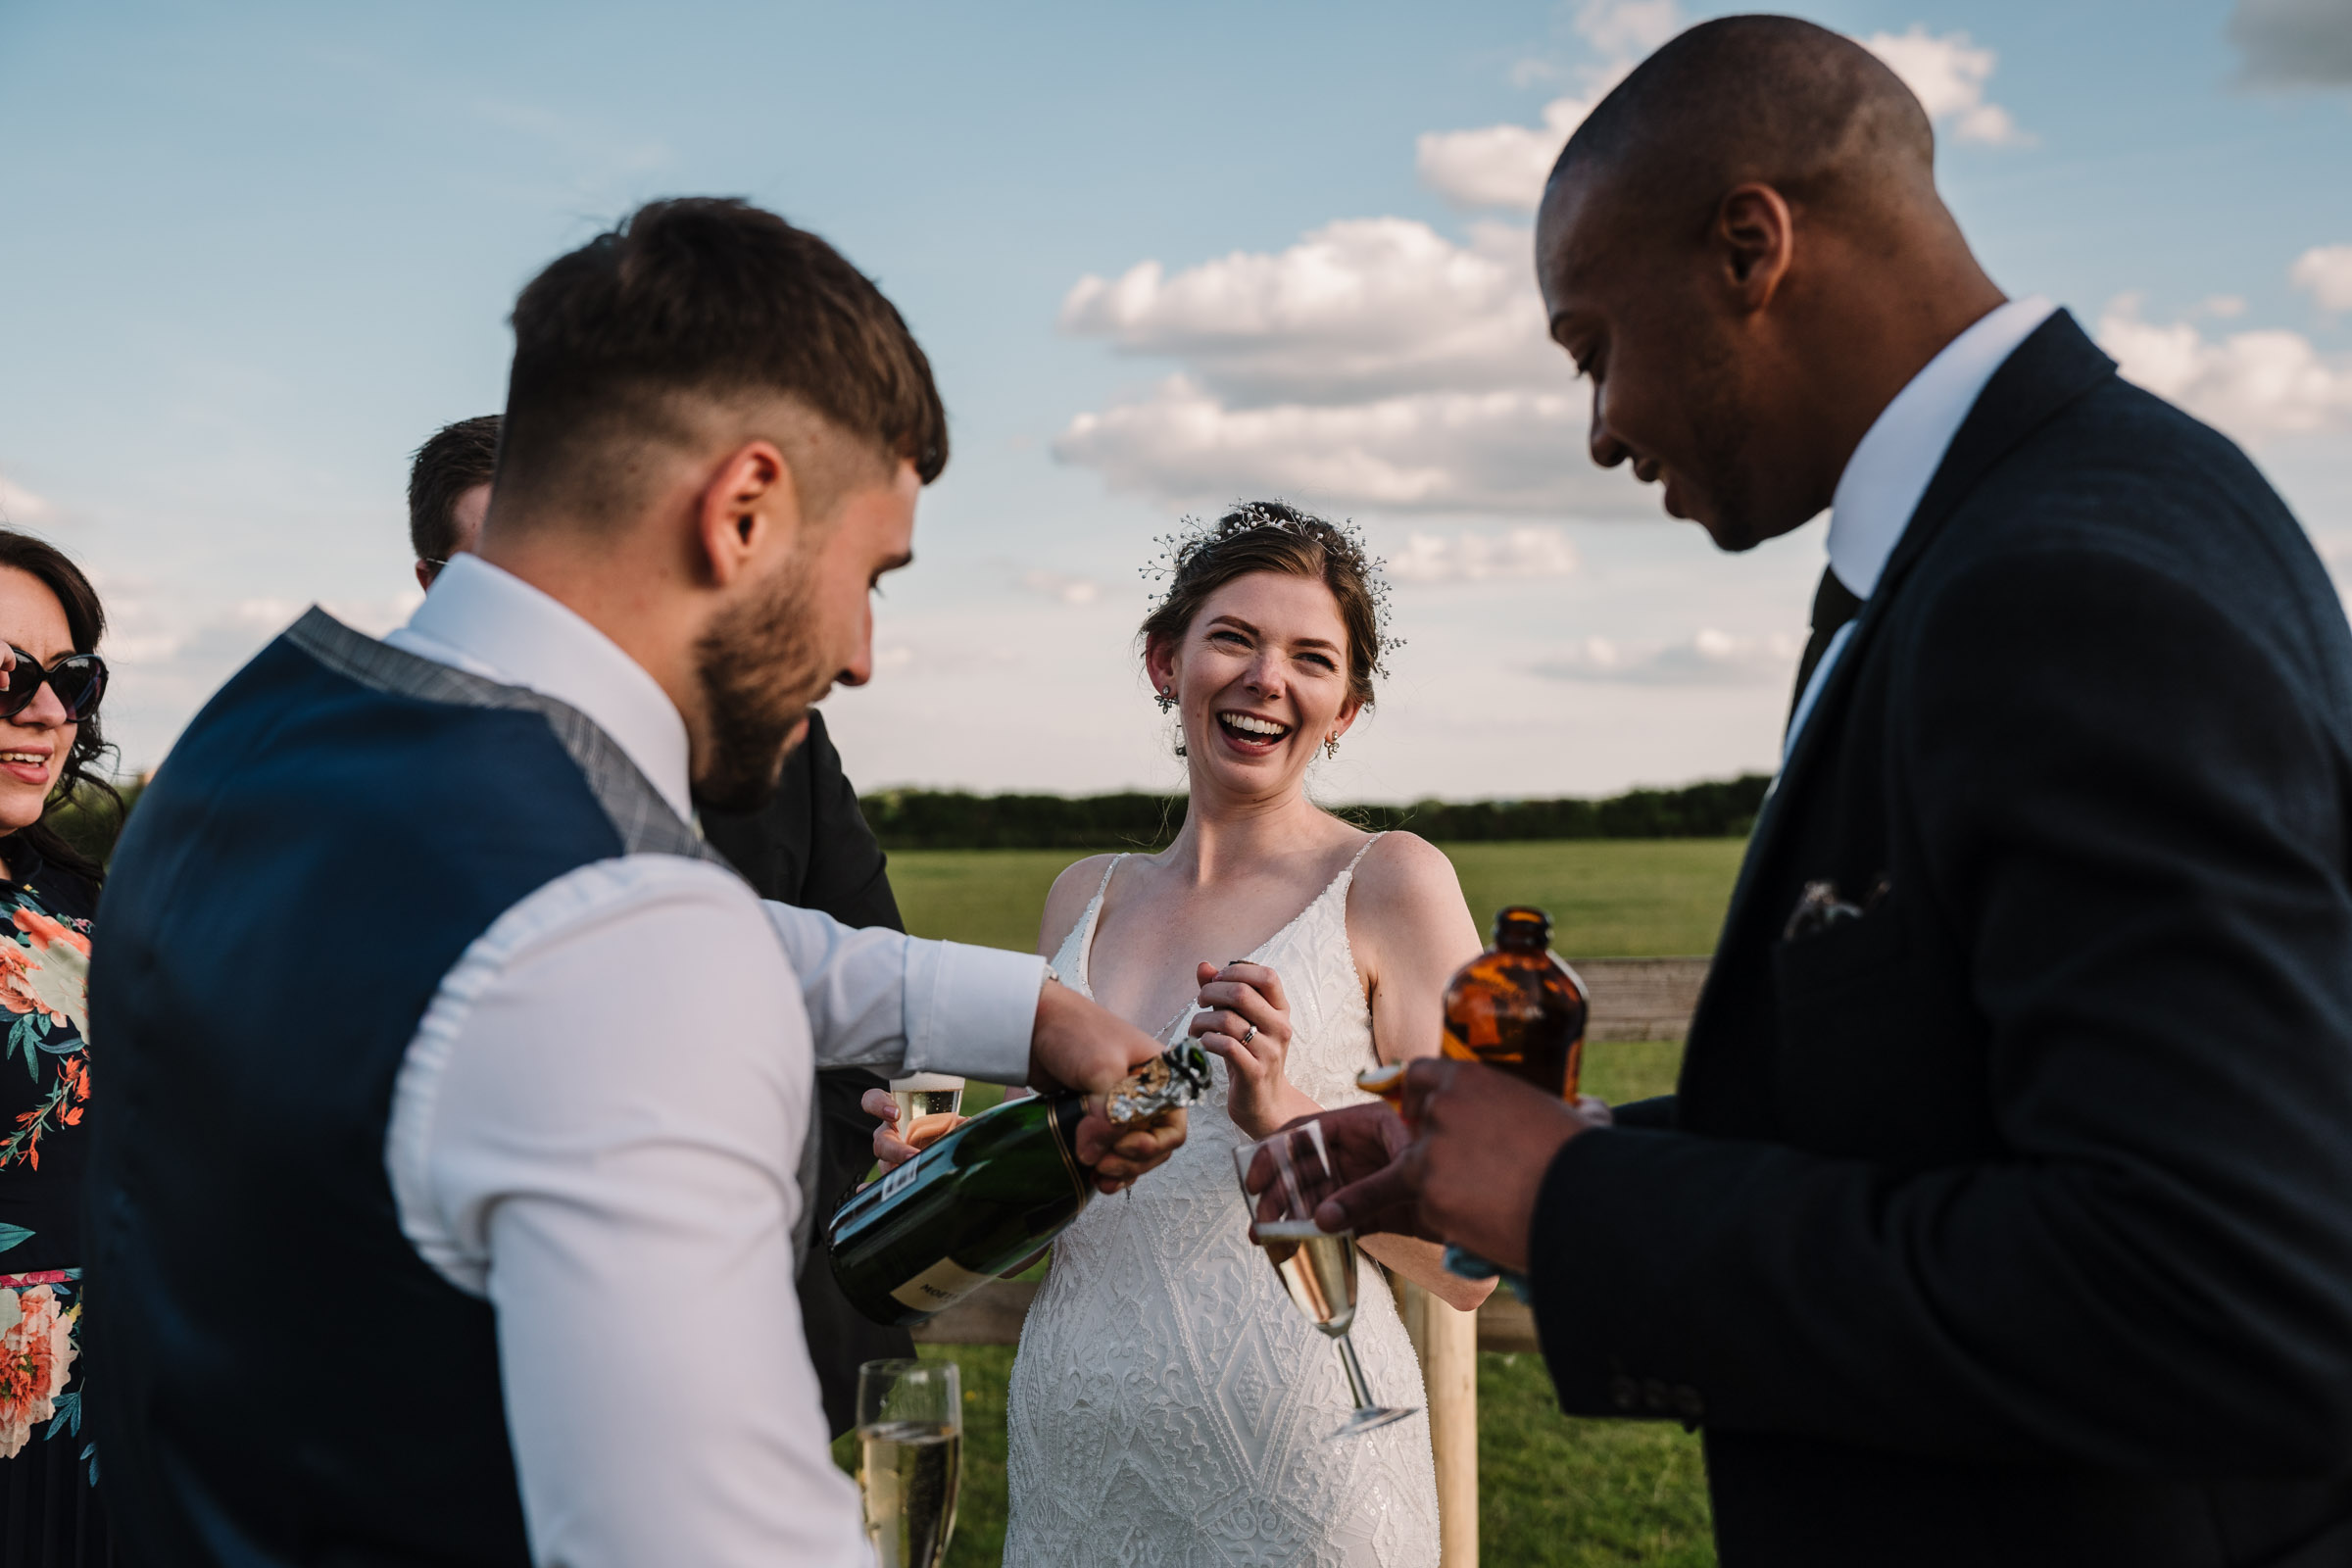 bride laughing and drinking champagne at outdoor wedding in Kenilworth